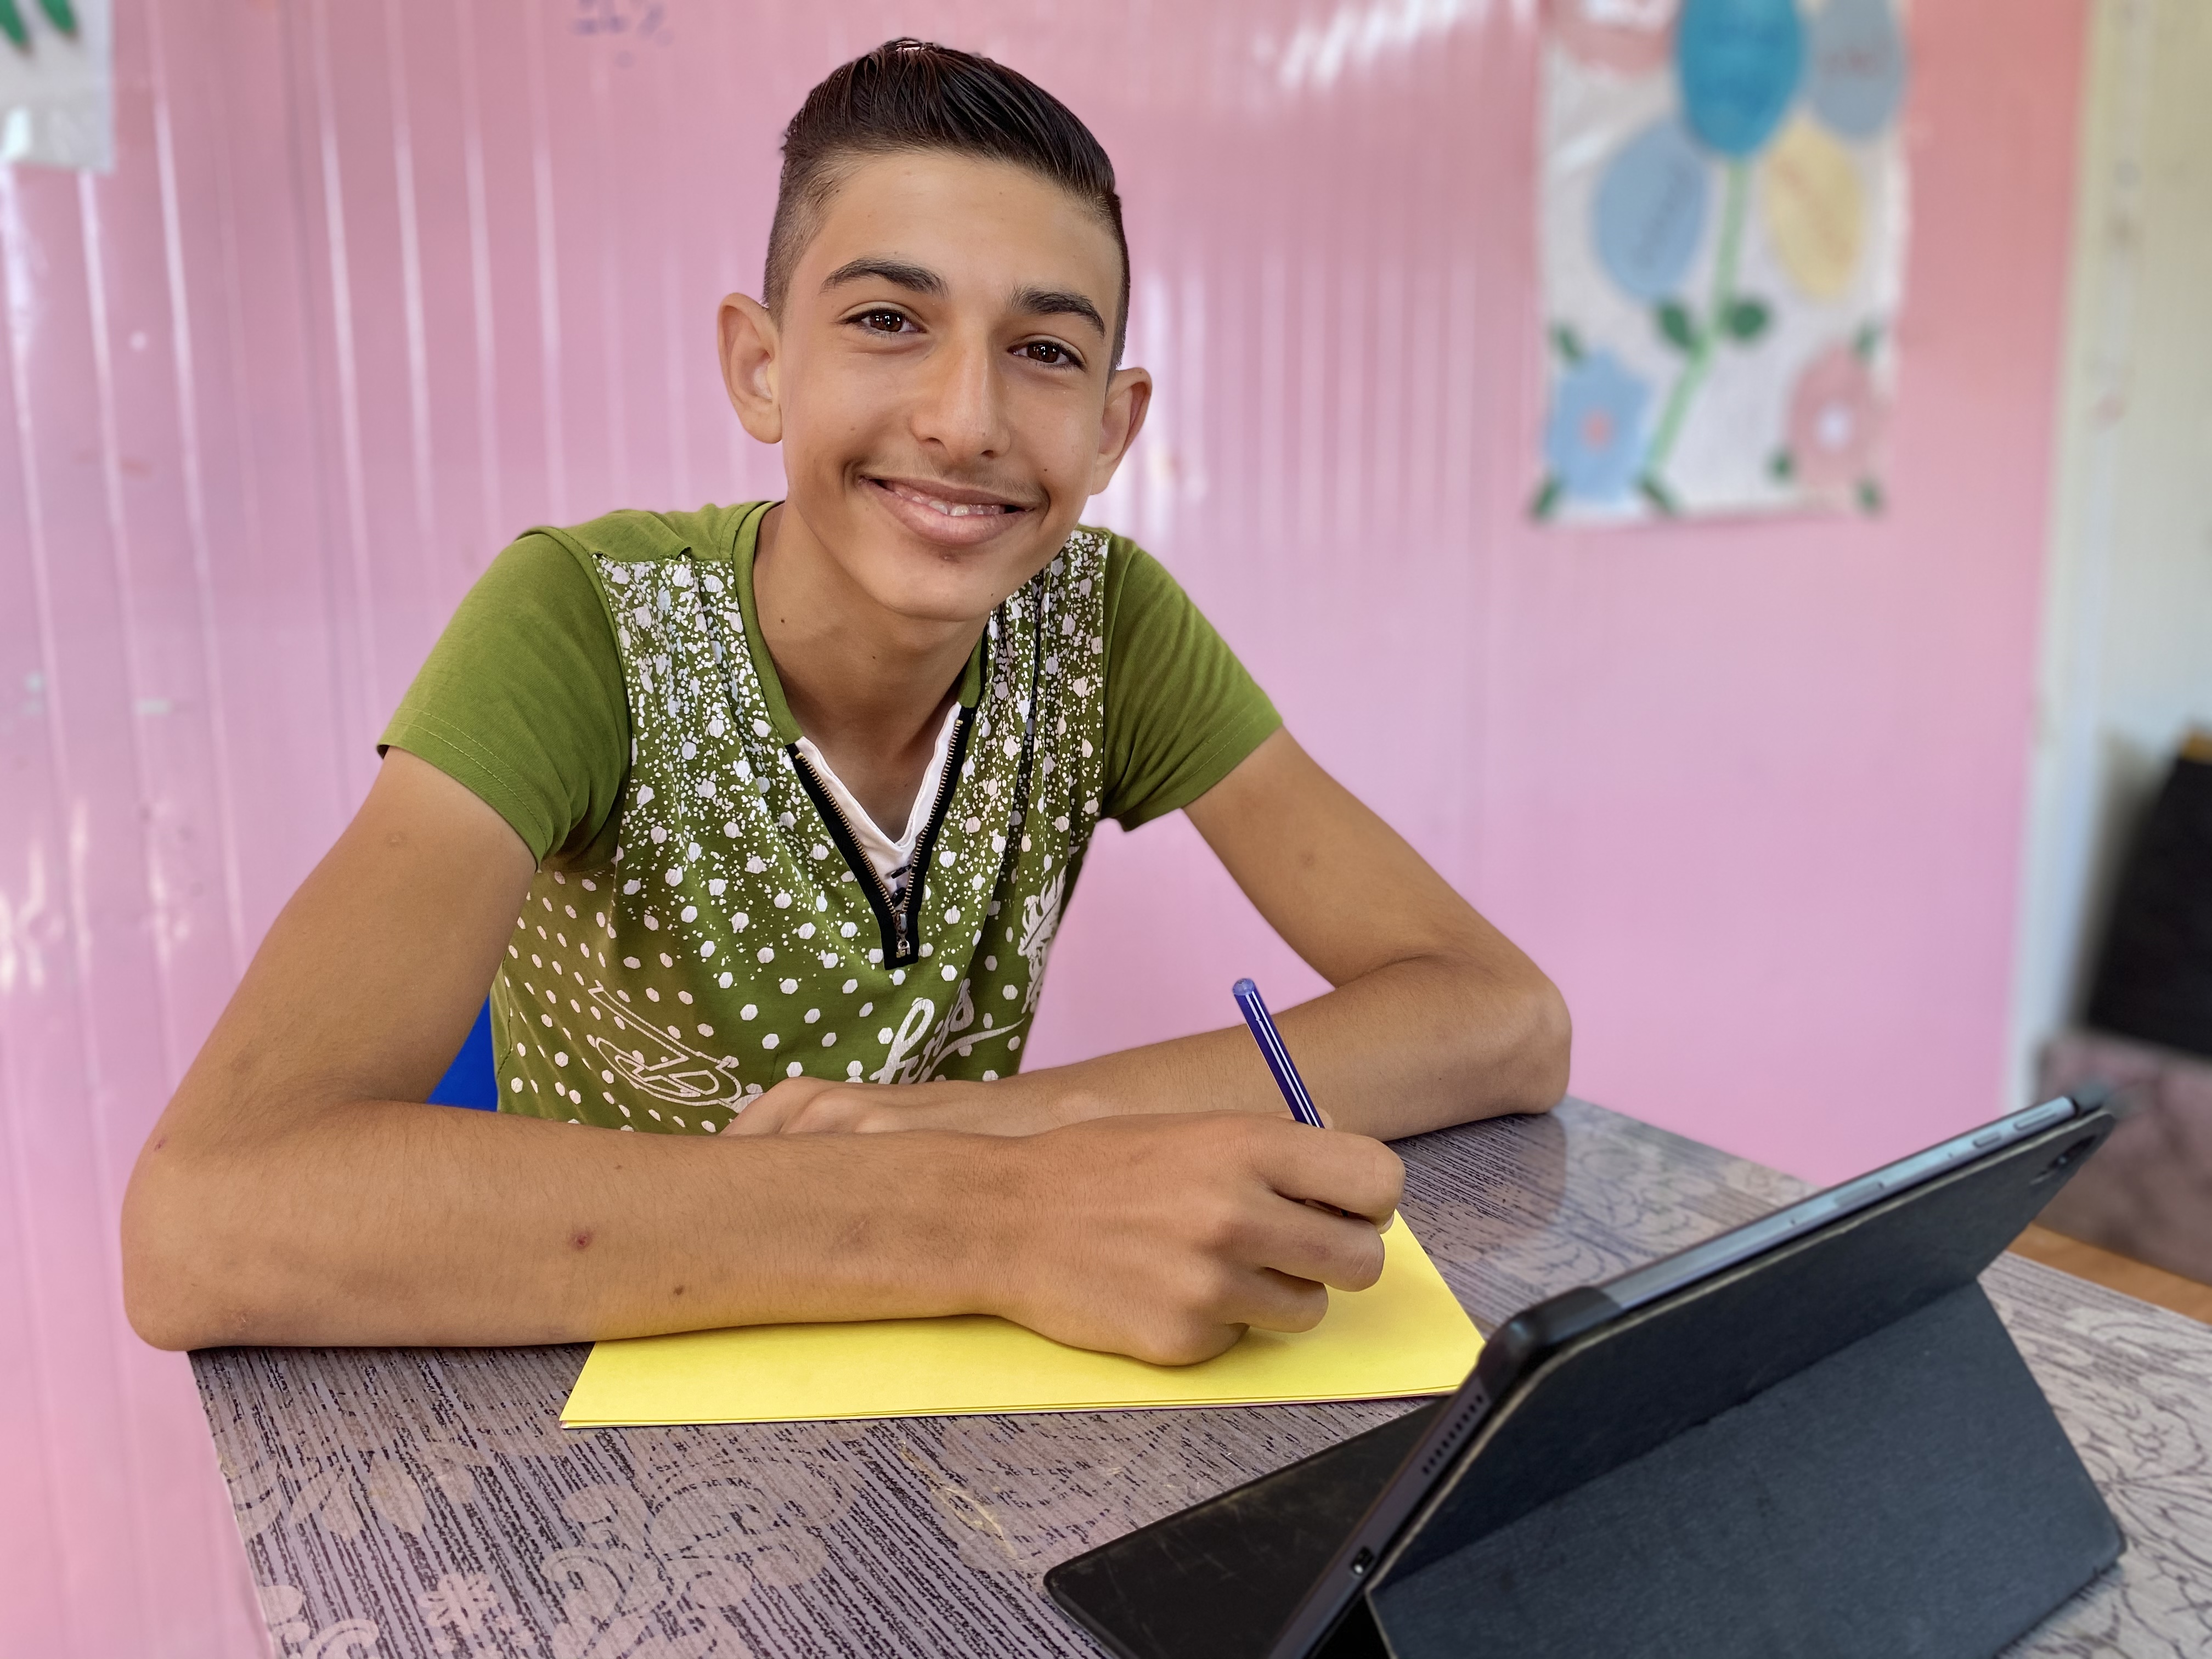 Determined to reimagine a better world: Syrian refugee adolescents’ beliefs in the importance of education